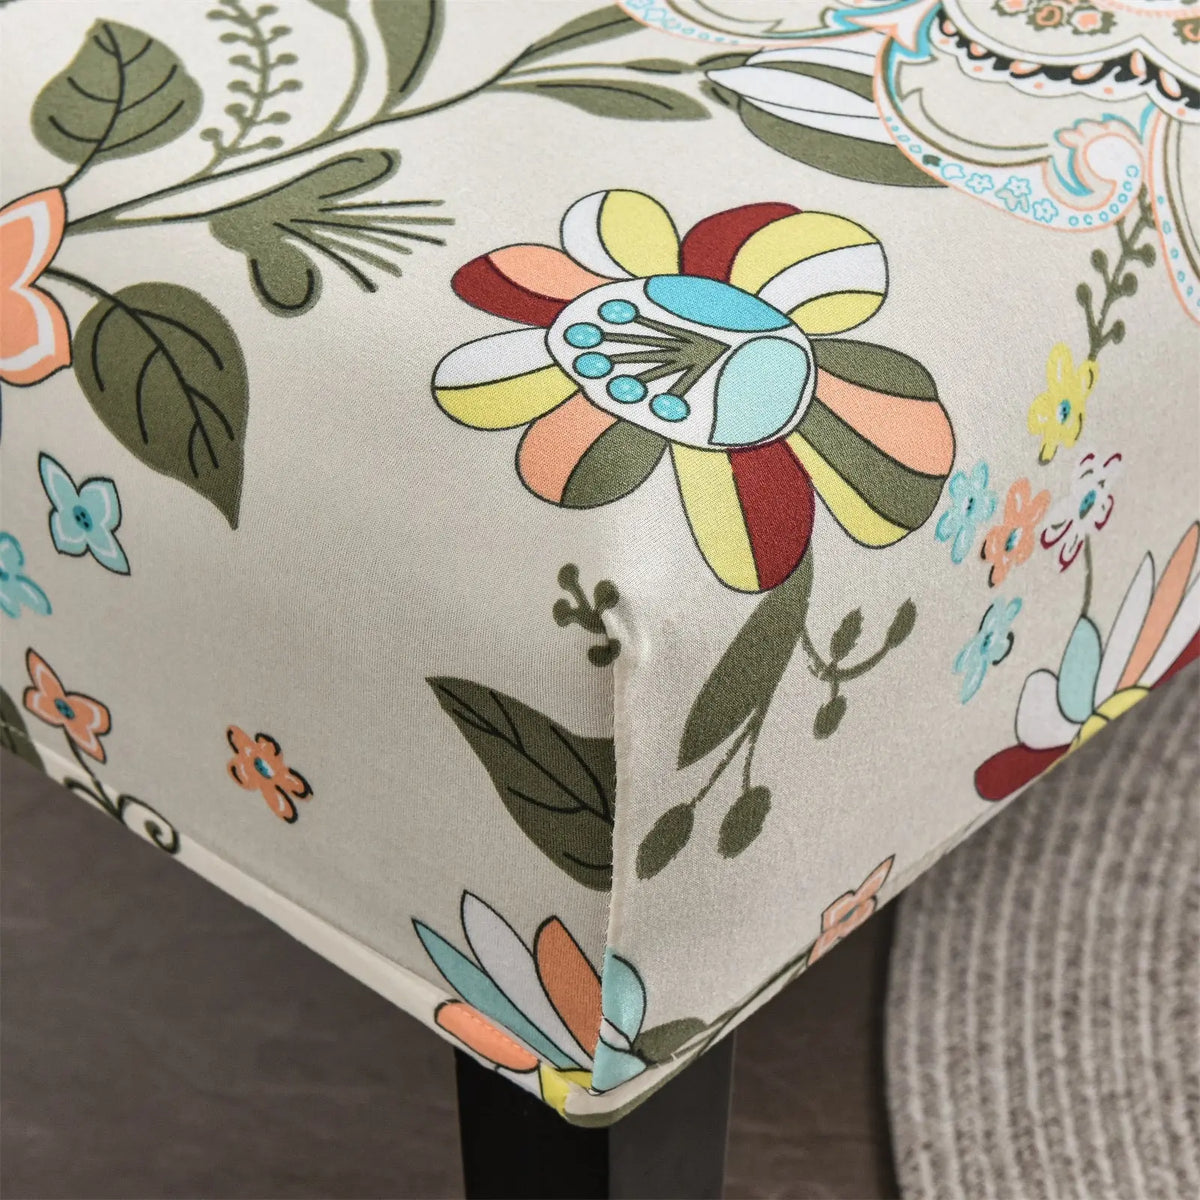 Floral Plus Size Dining Bench Cover Soft Washable Bench Ottaman Cover Slipcover BC0015 Crfatop %sku%